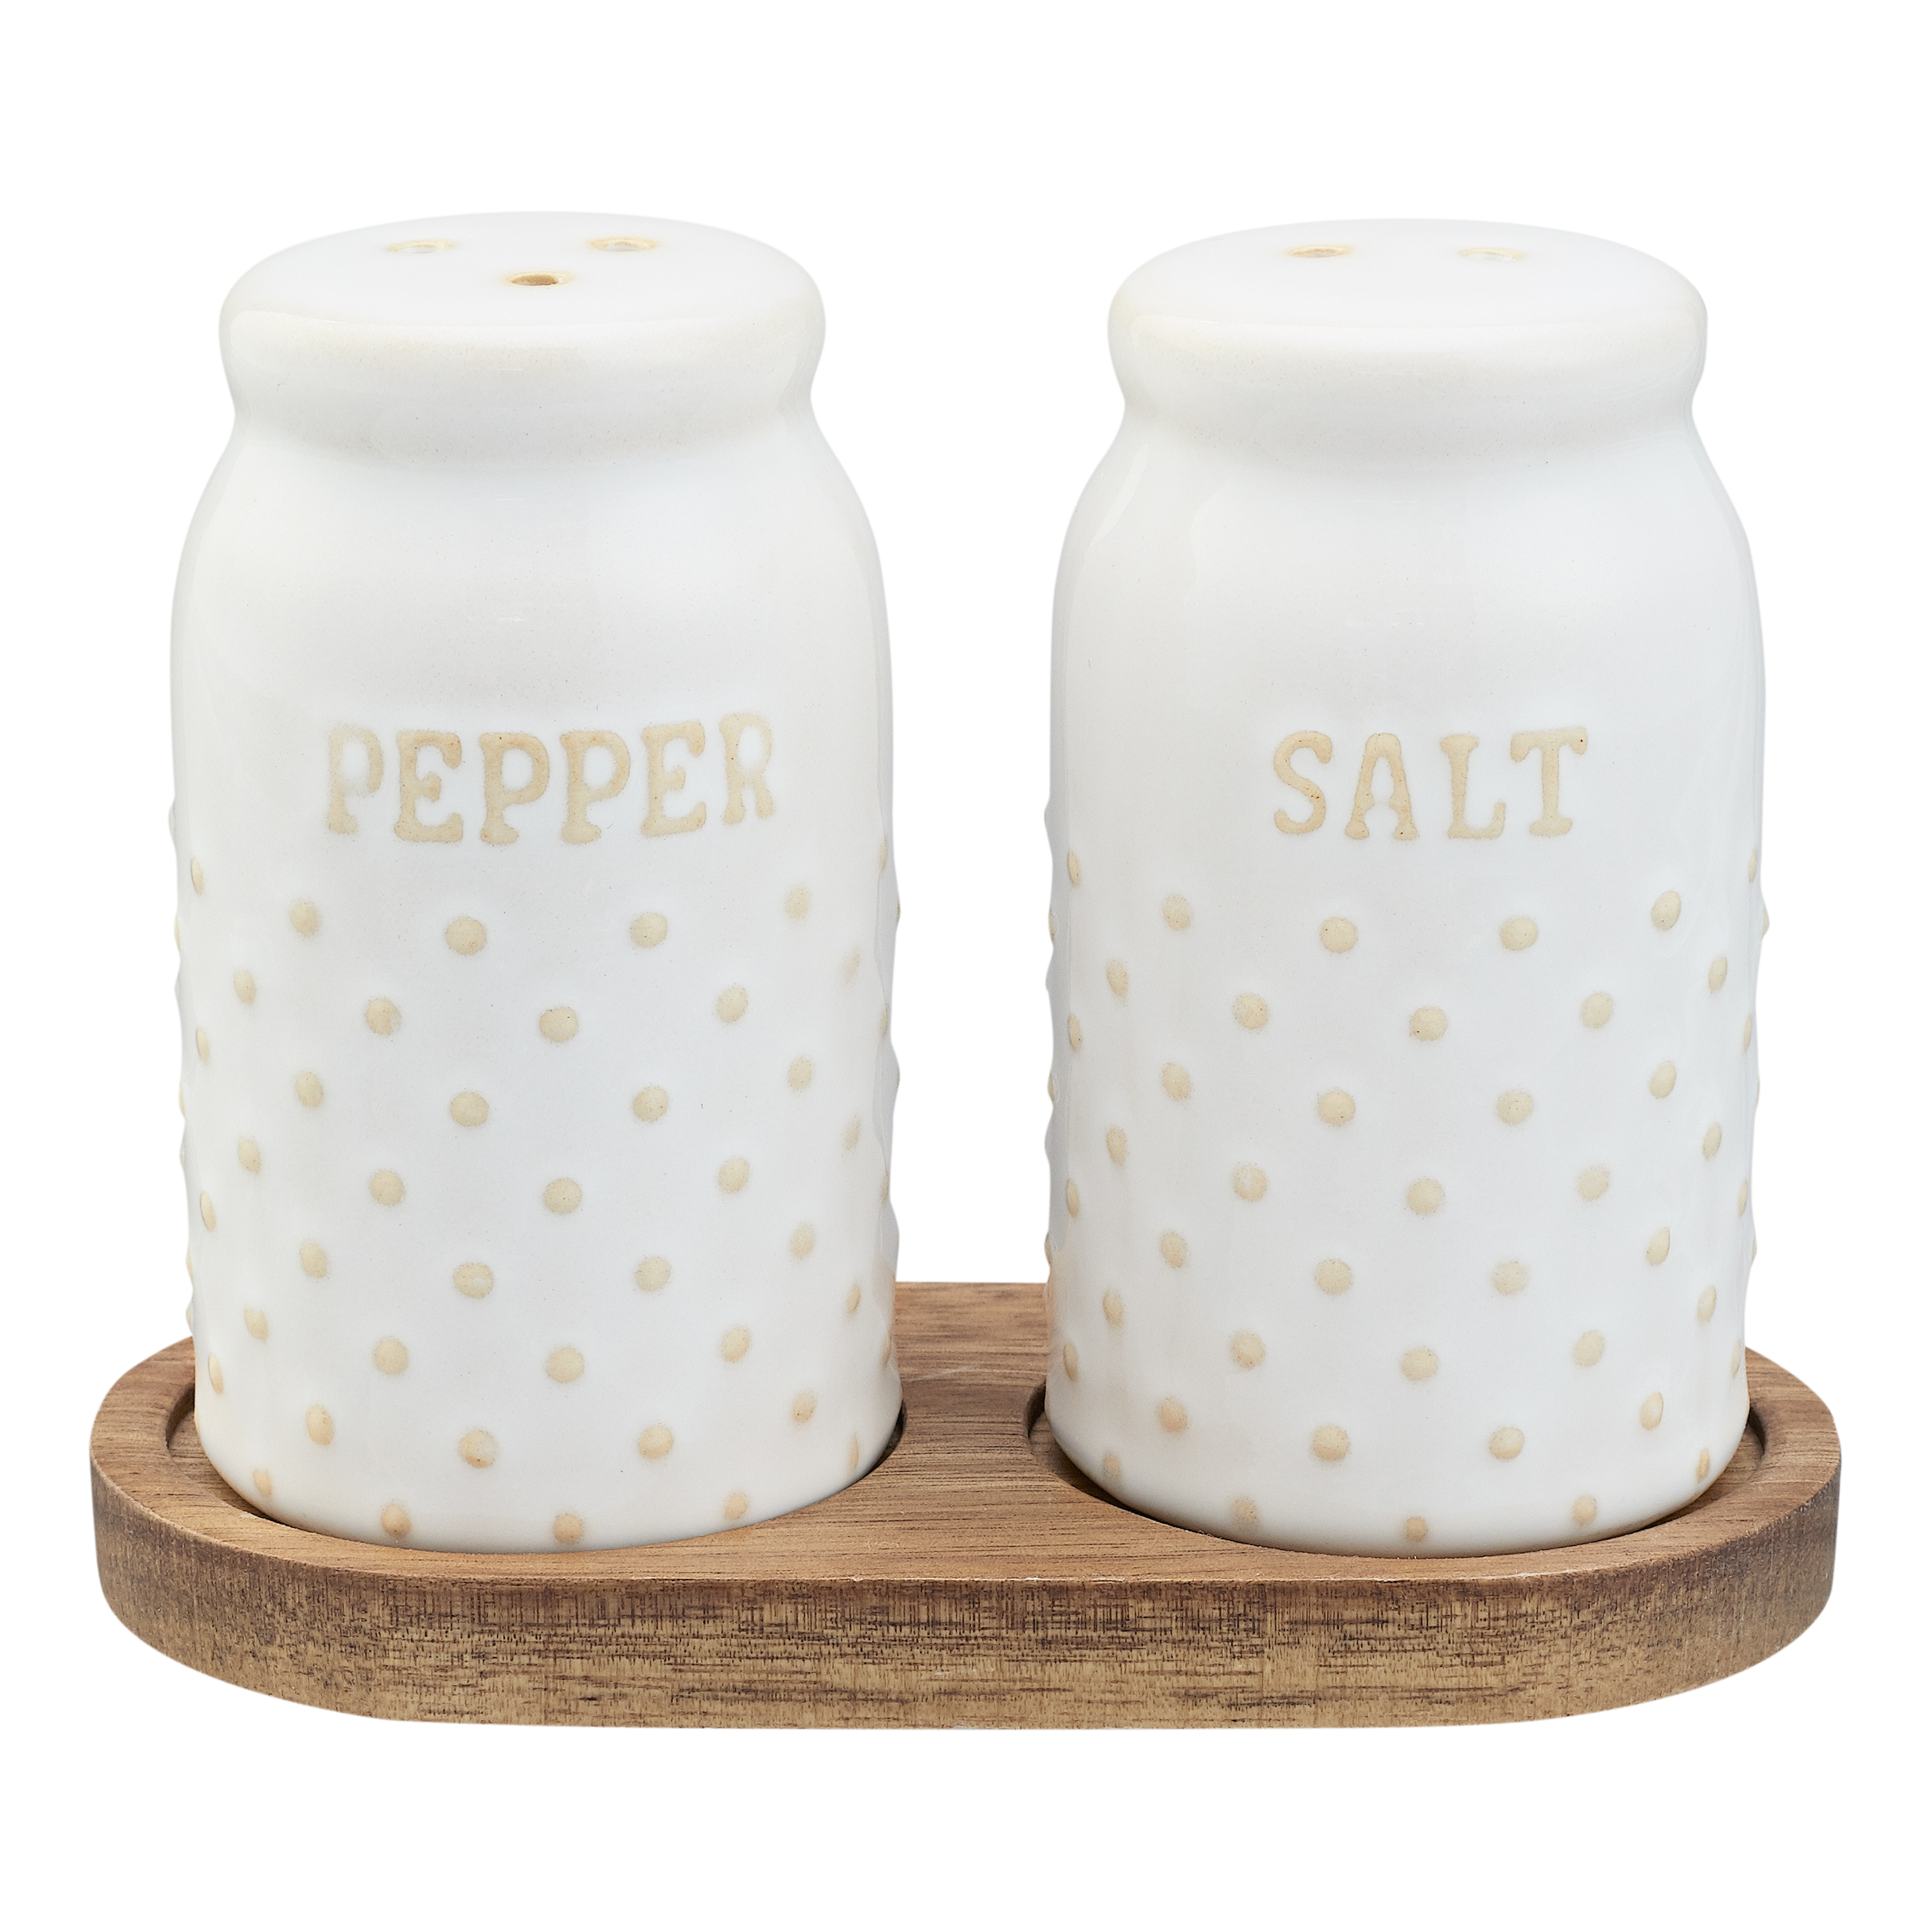 Better Homes & Gardens Farmhouse 4-Piece Dotted Sugar Cannister, Creamer, and Salt and Pepper Shaker Set in White - image 5 of 6